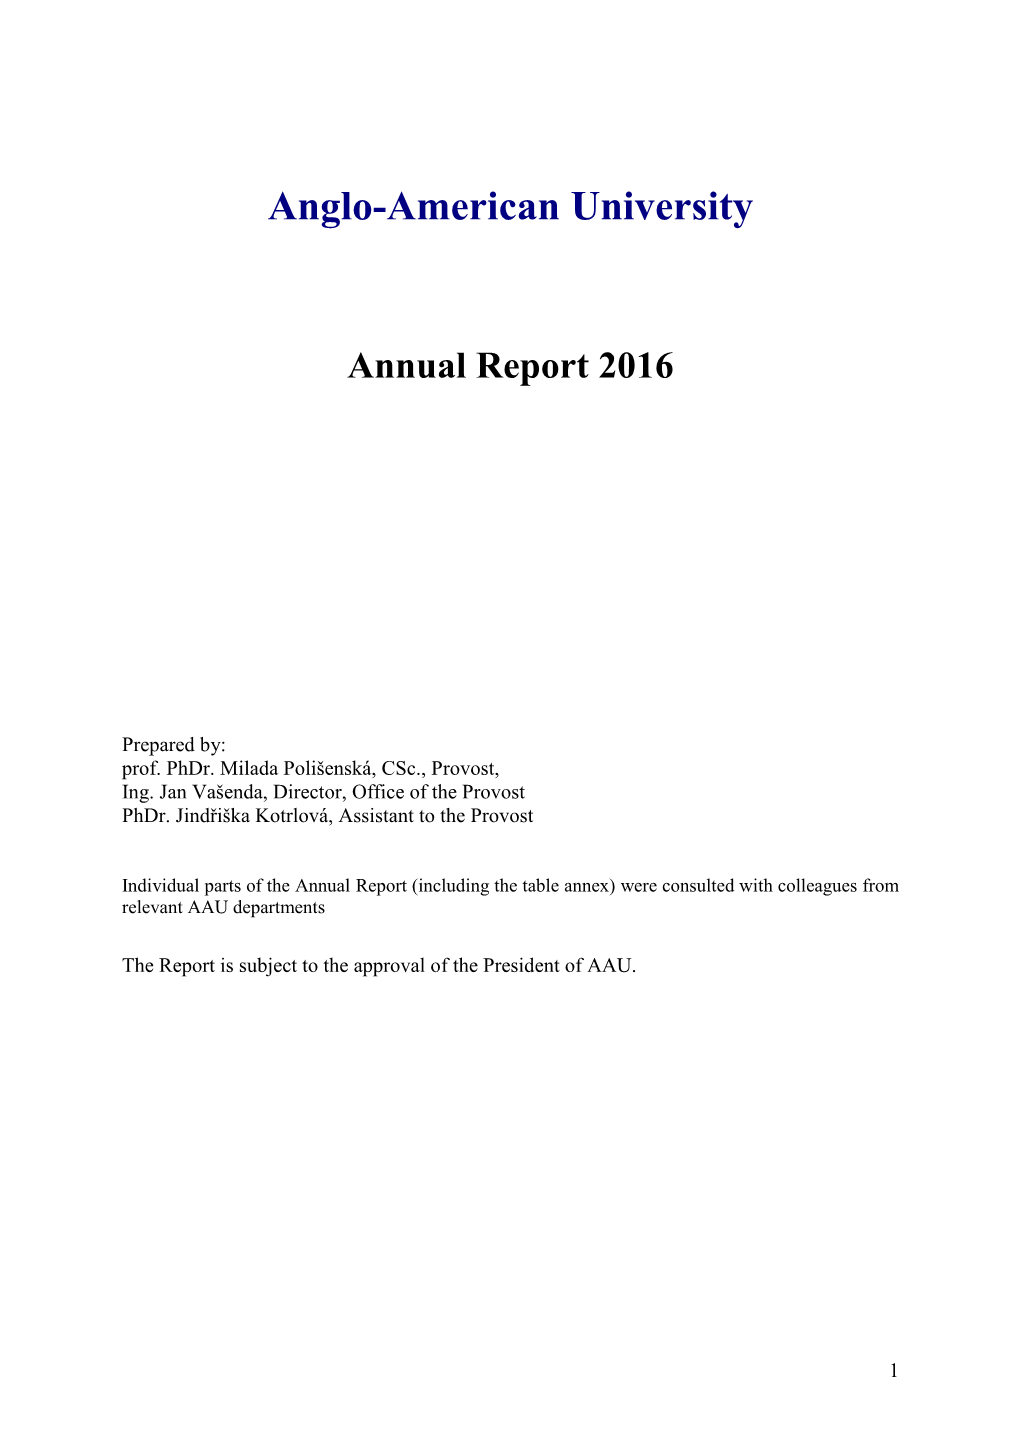 Anglo-American University Annual Report 2016